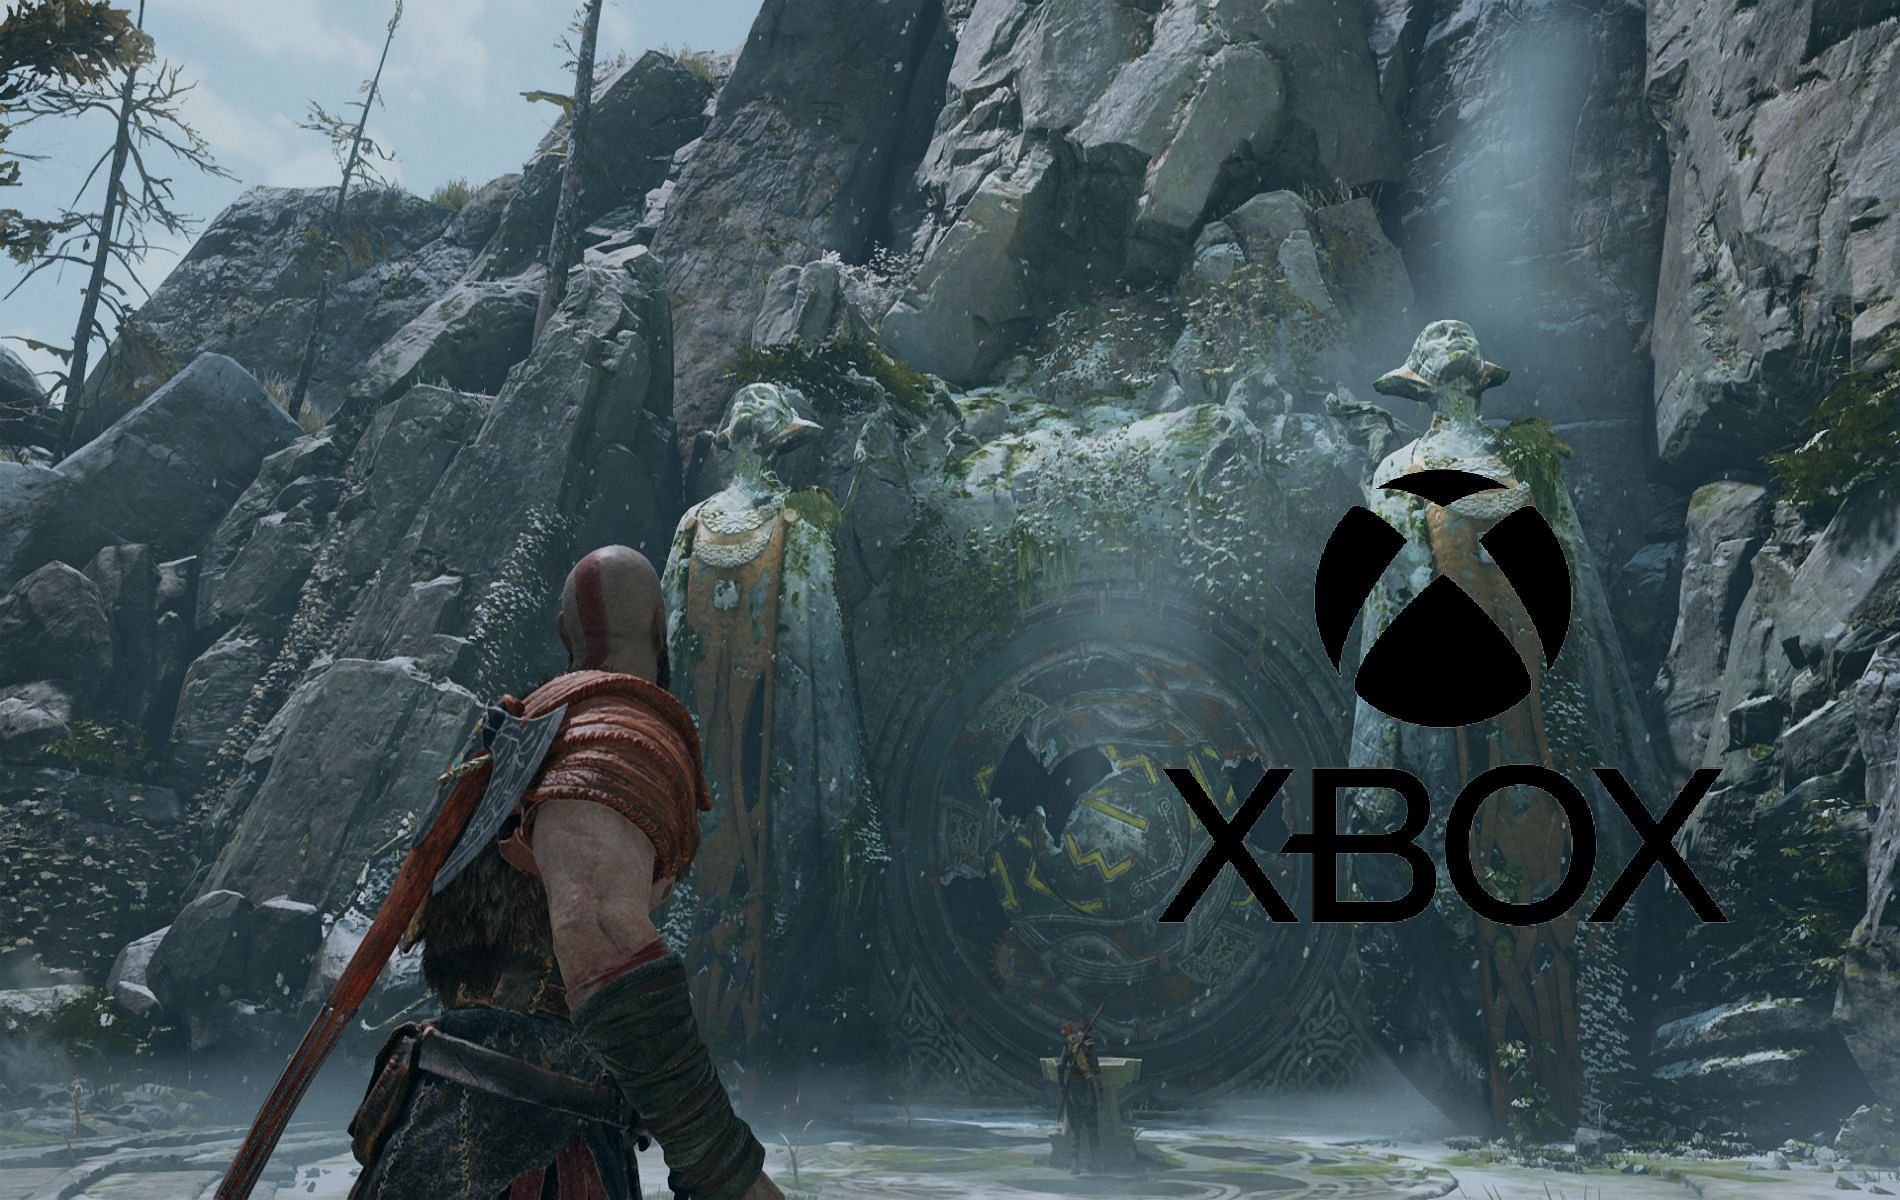 Can you play God of War PC with Xbox controller?